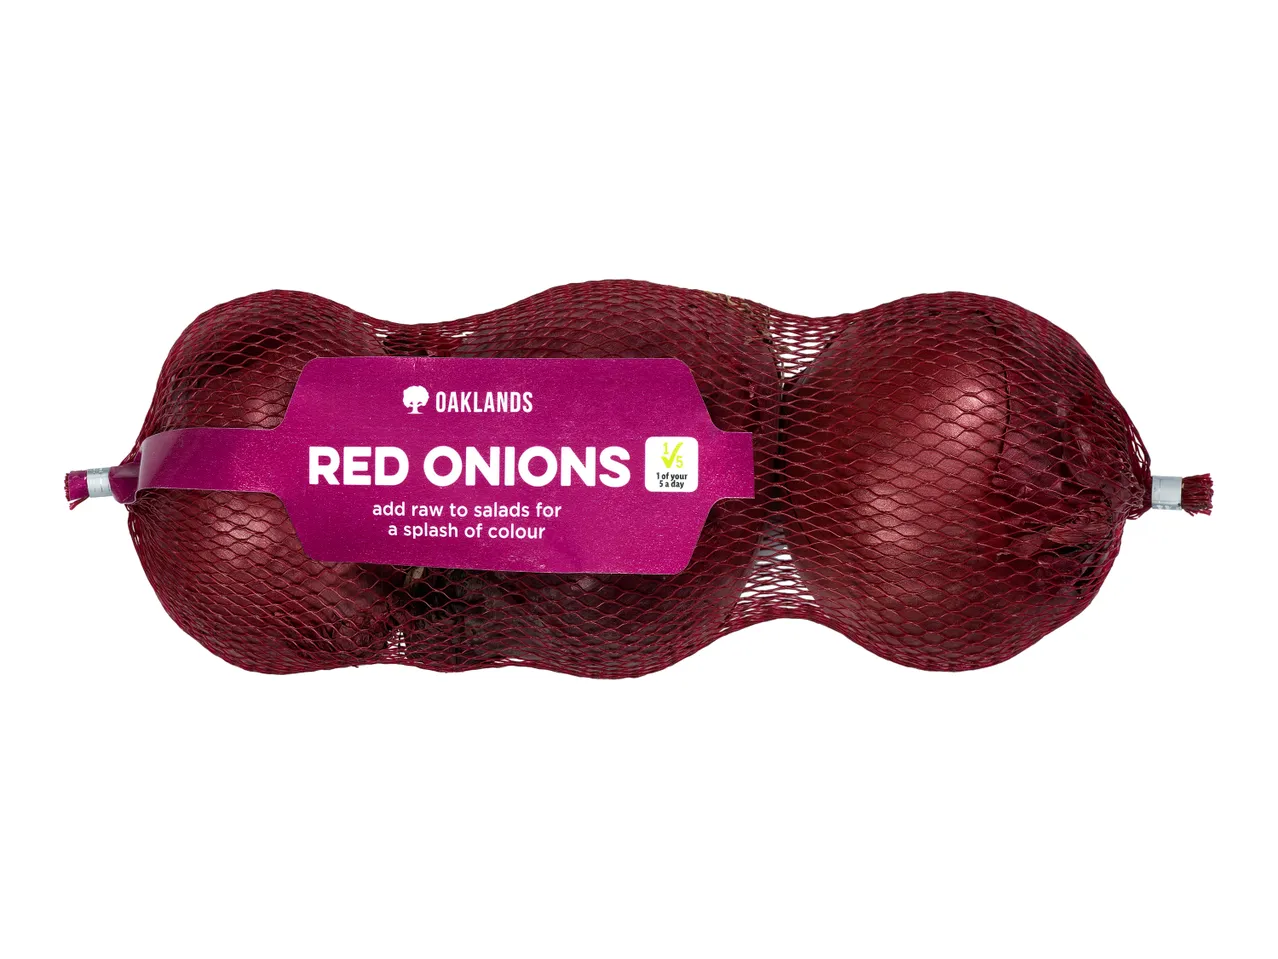 Go to full screen view: Oaklands Red Onions - Image 2